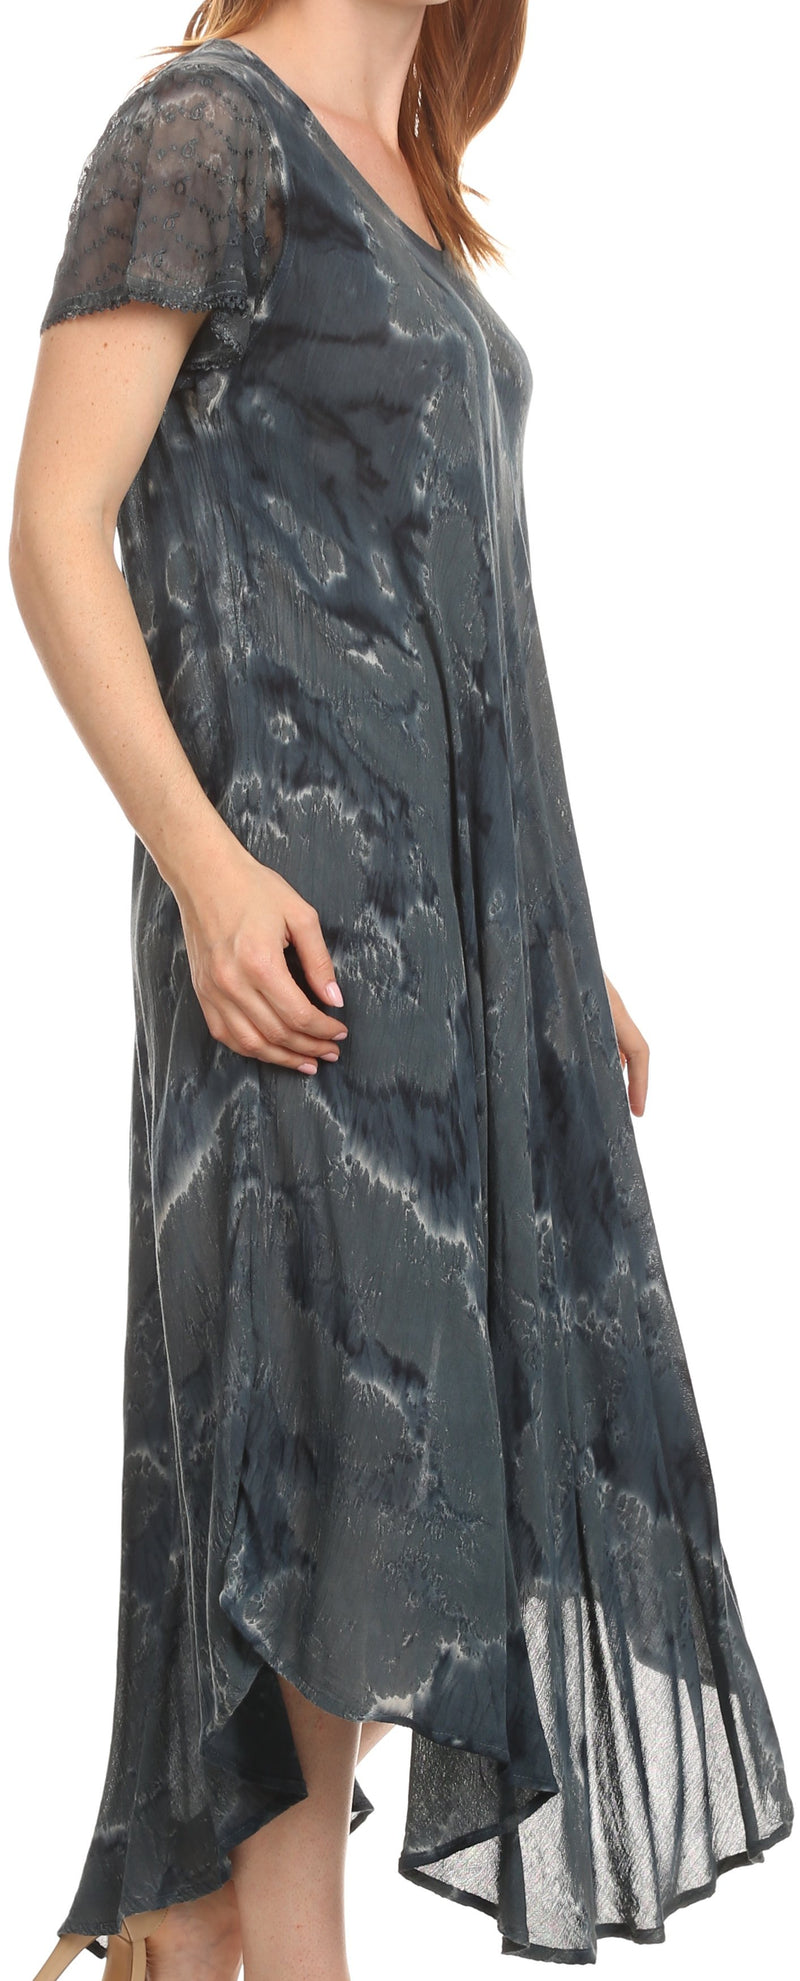 Sakkas Sayli Long Tie Dye Cap Sleeve Embroidered Wide Neck Caftan Dress / Cover Up